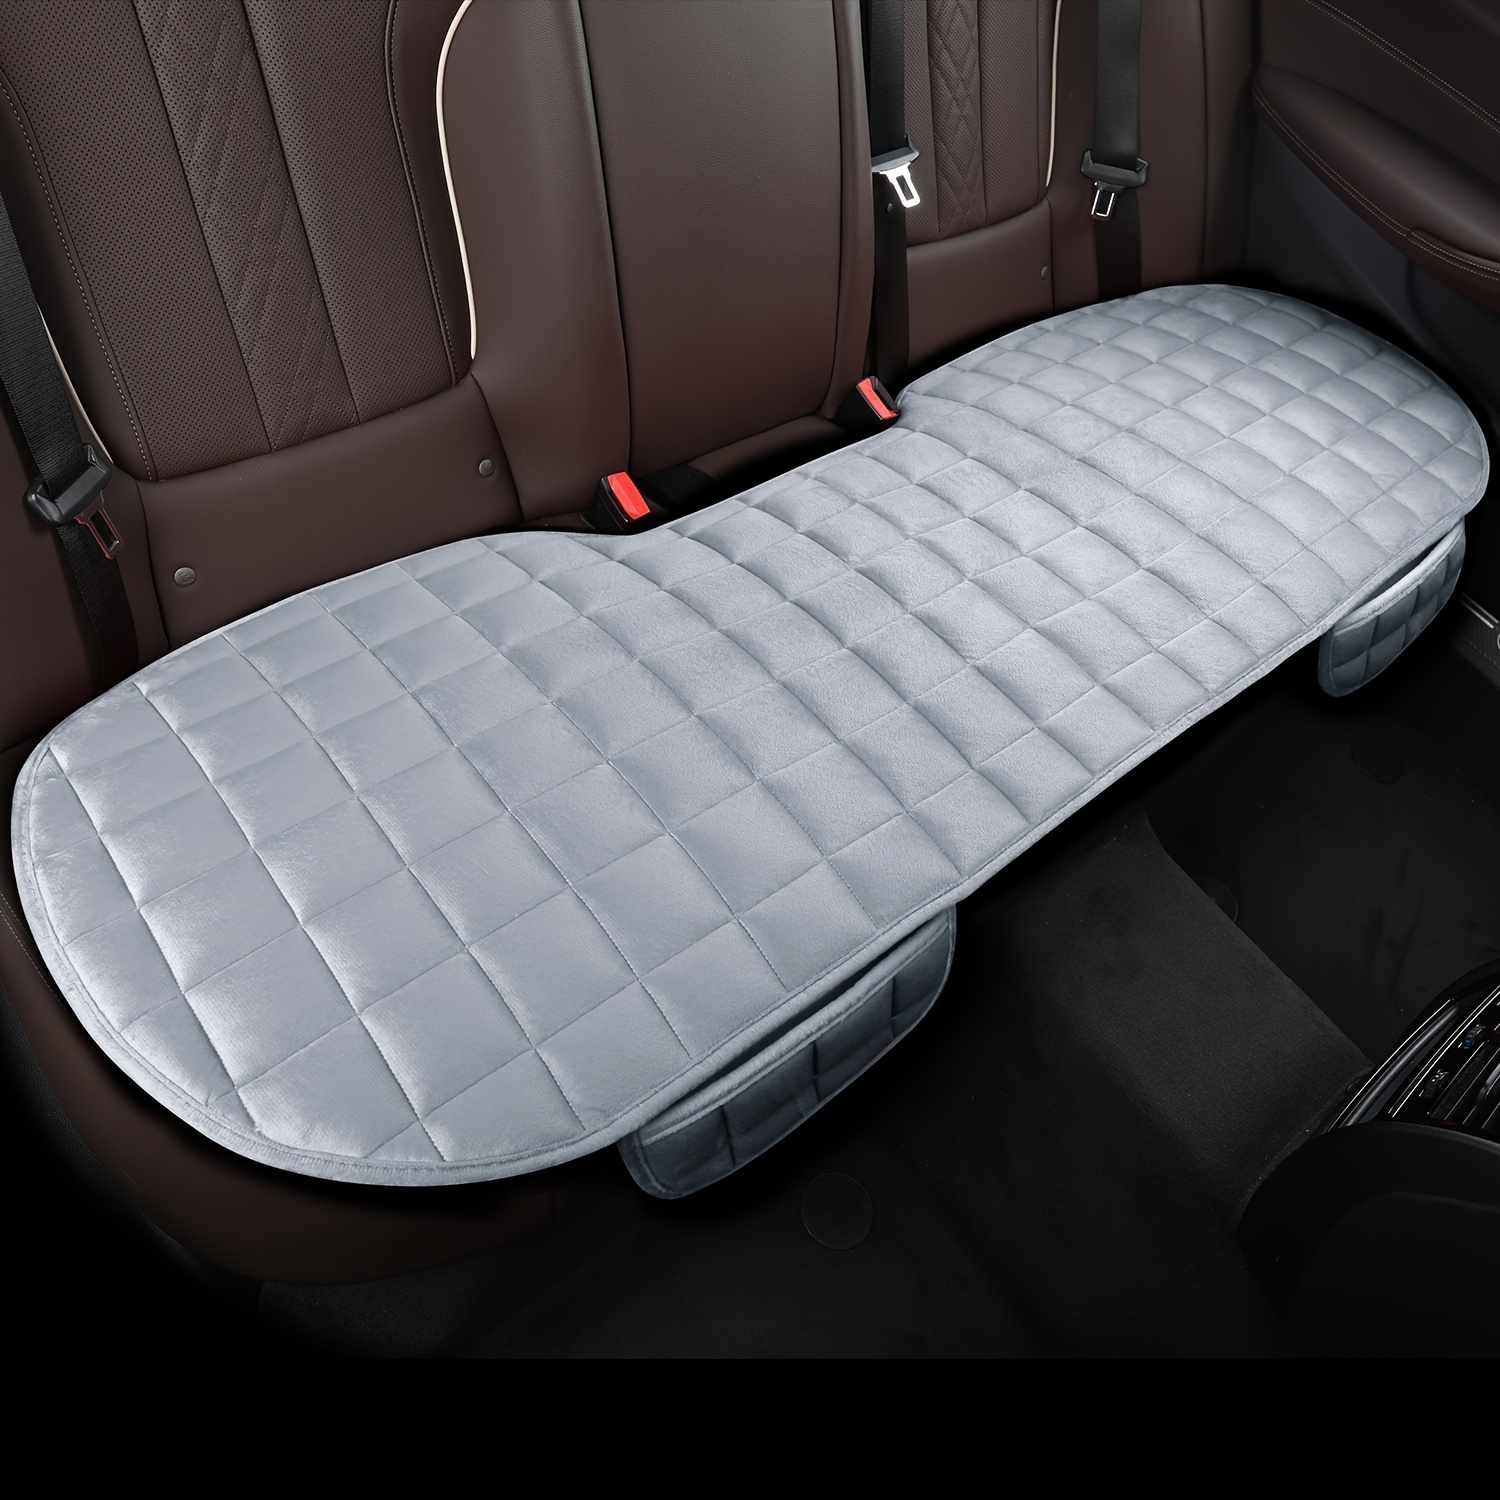 Comfort Seat Cushion for Car Non Slip Rubber Vehicles Office Chair Home Car  Pad Seat Cover